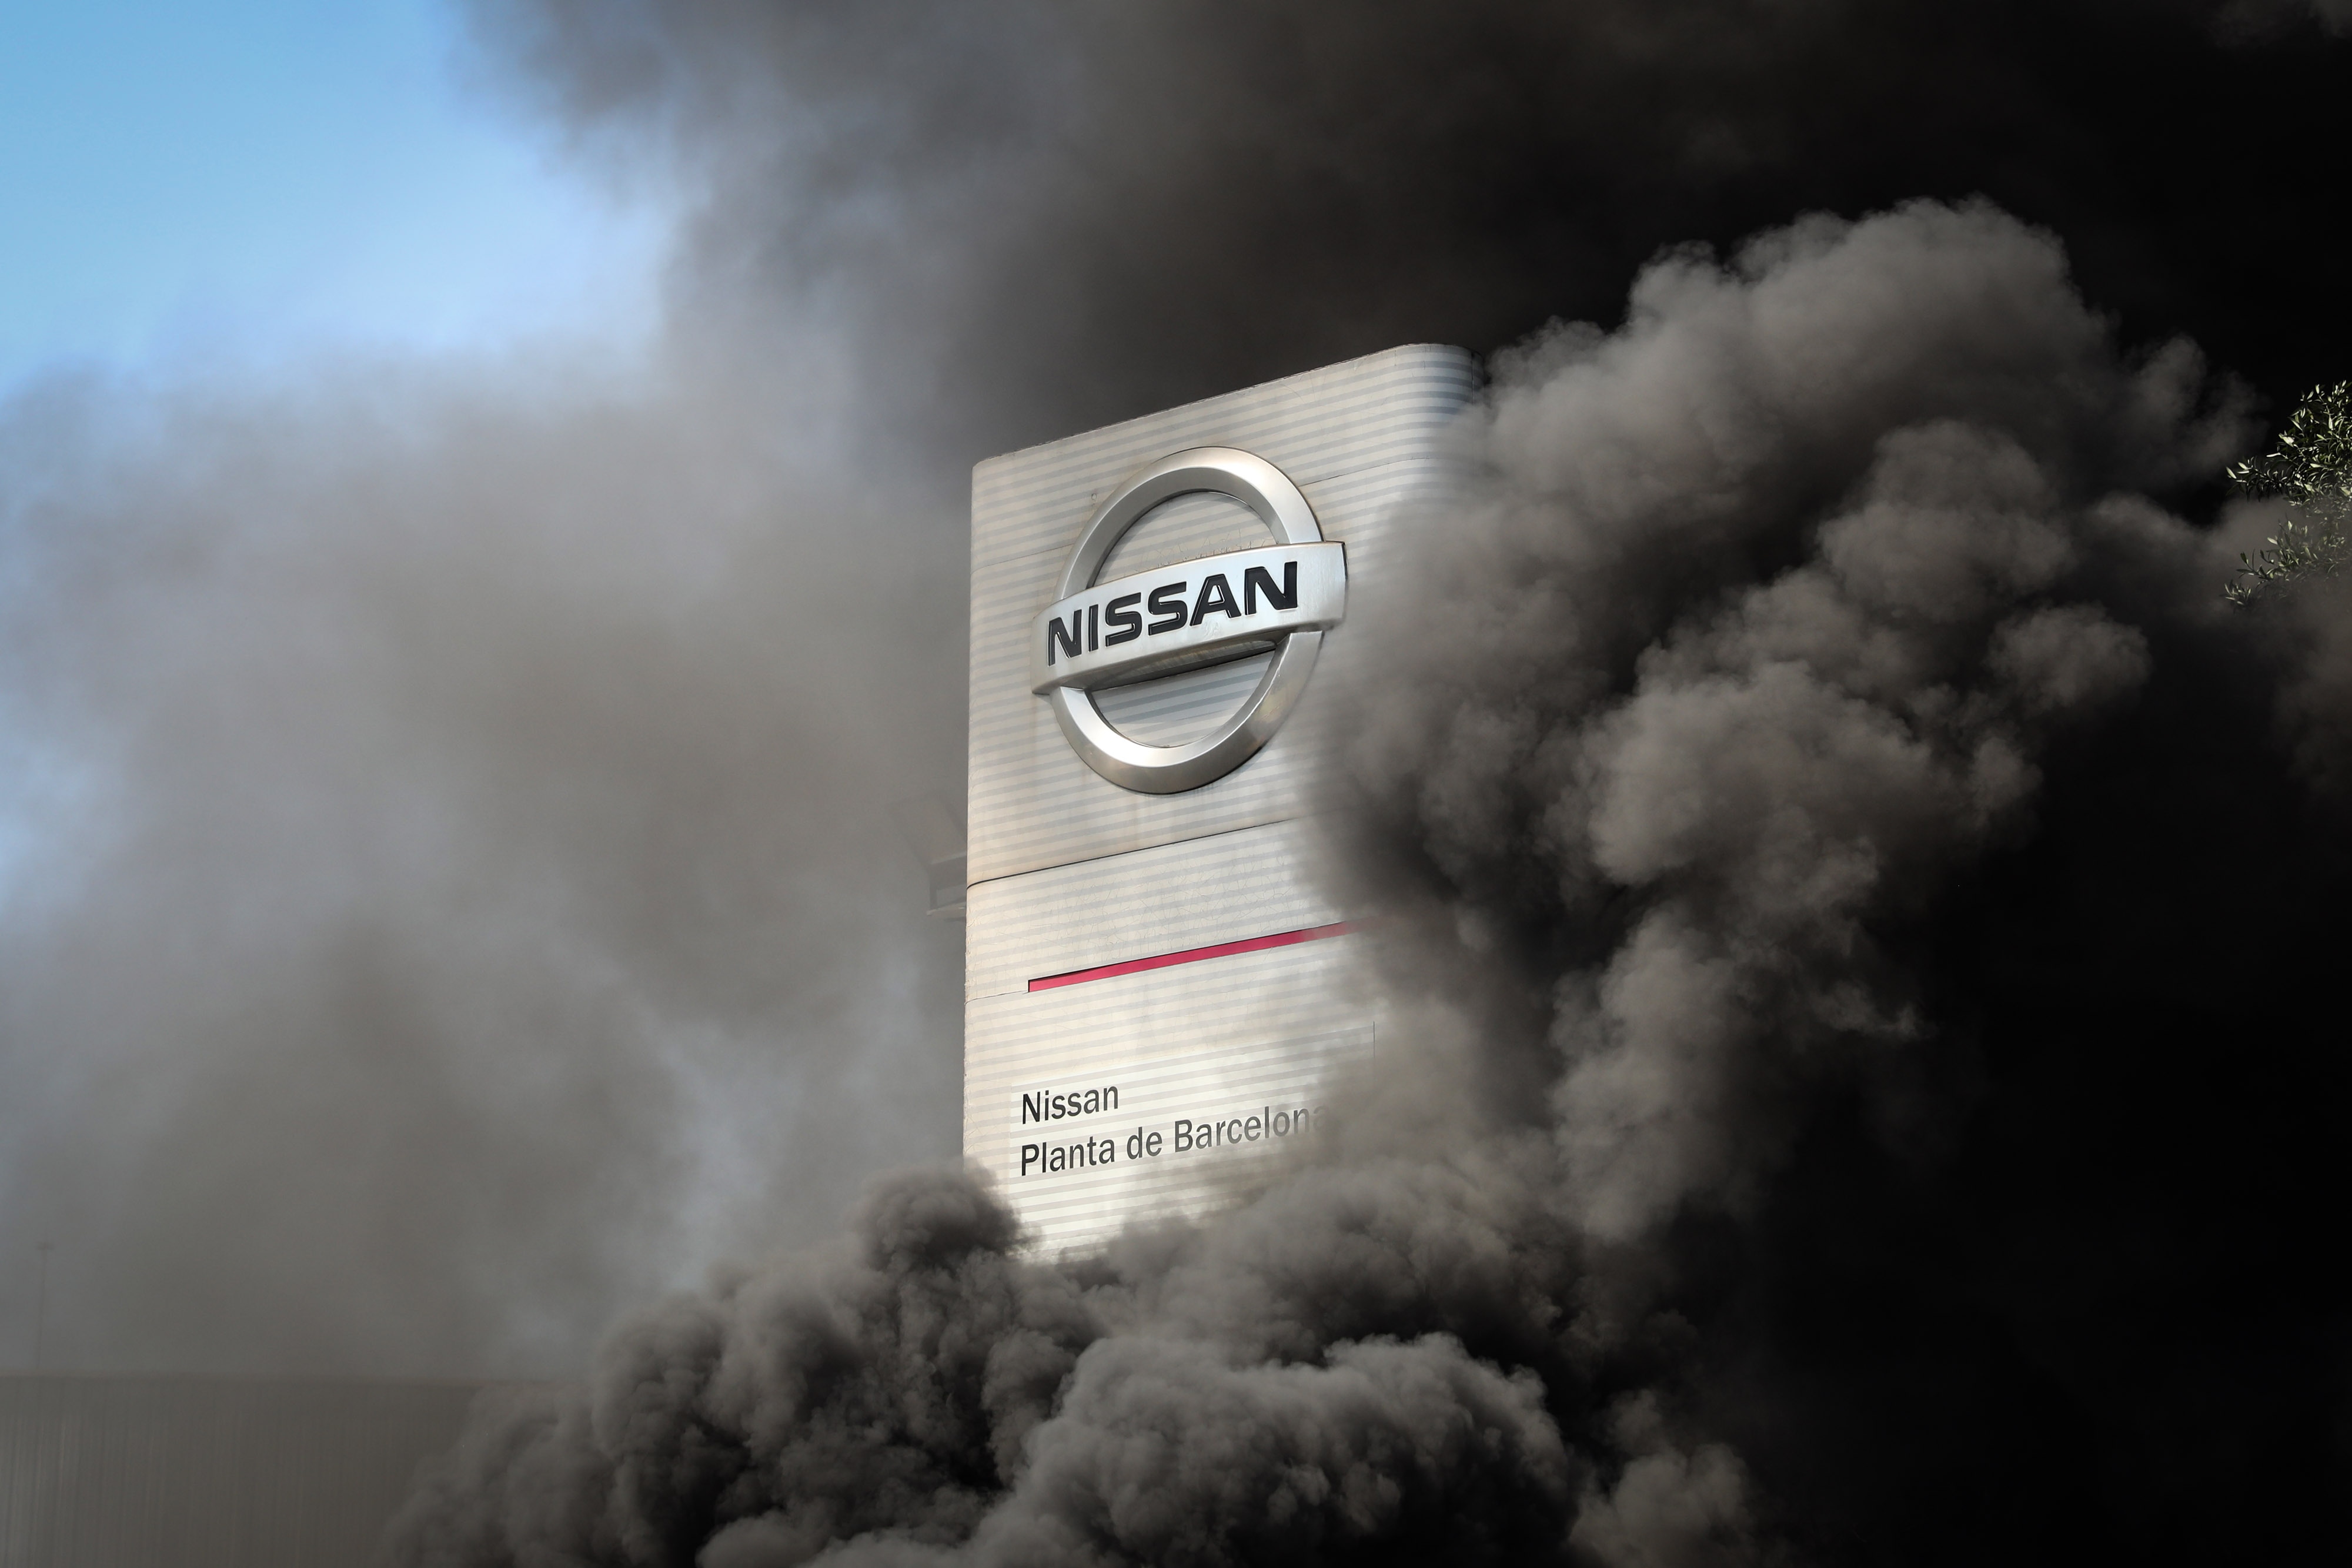 File photo: Smoke from burning tires lit by demonstrators cover a logo outside the Nissan Motor Co. plant in Barcelona, Spain, on Thursday, May 28, 2020. Nissan said it intends to close its Barcelona plant, in addition to the one it is planning to shutter in Indonesia. 